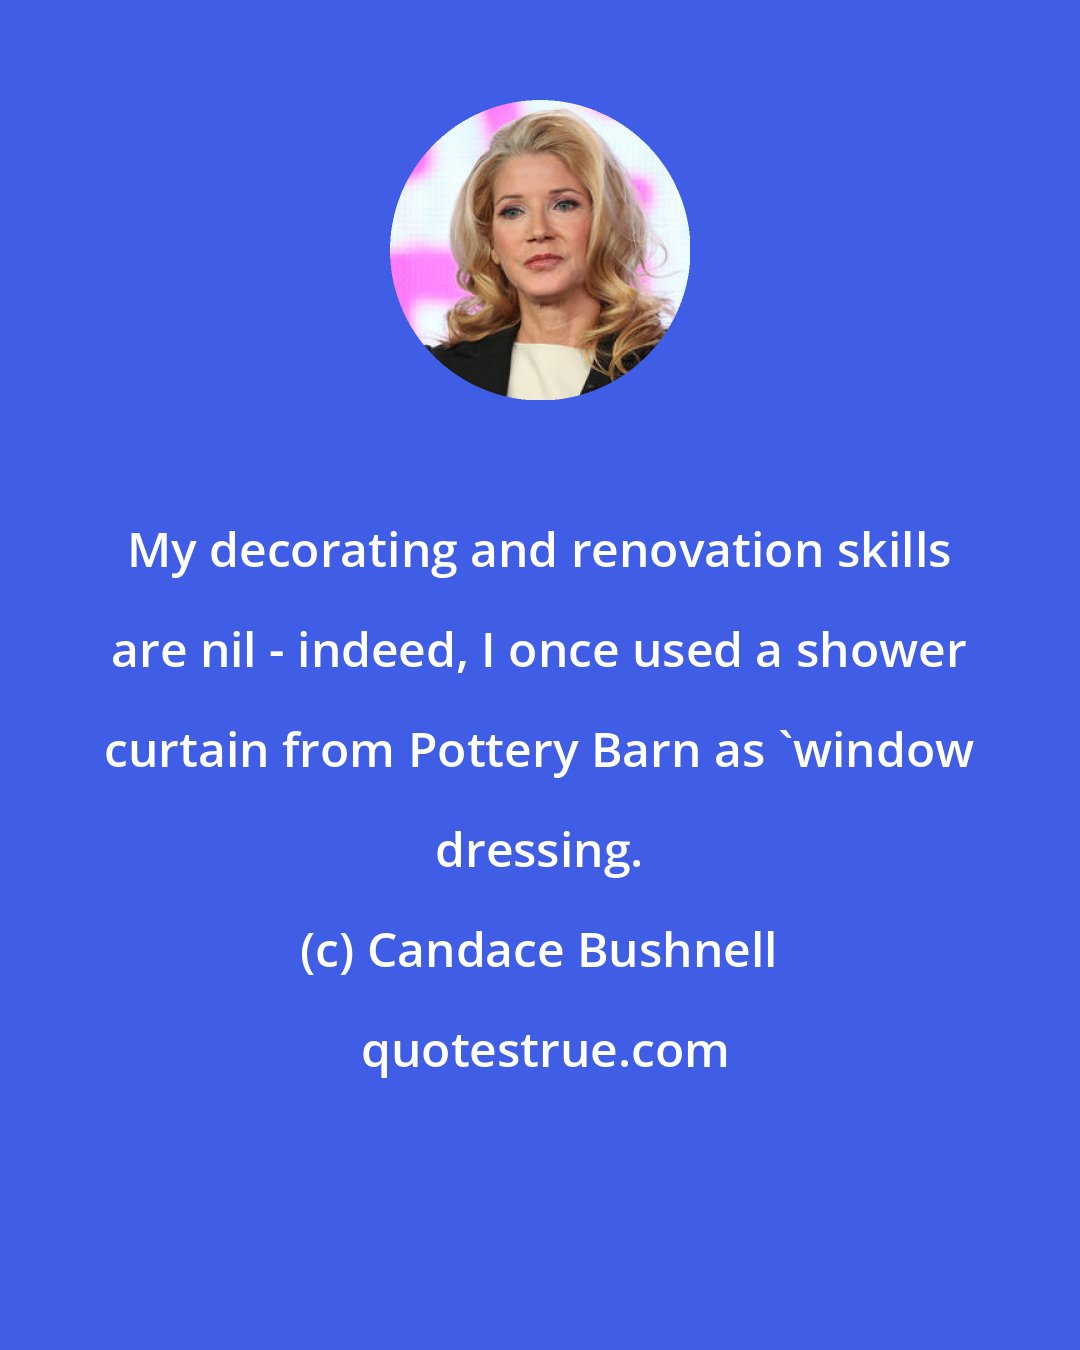 Candace Bushnell: My decorating and renovation skills are nil - indeed, I once used a shower curtain from Pottery Barn as 'window dressing.